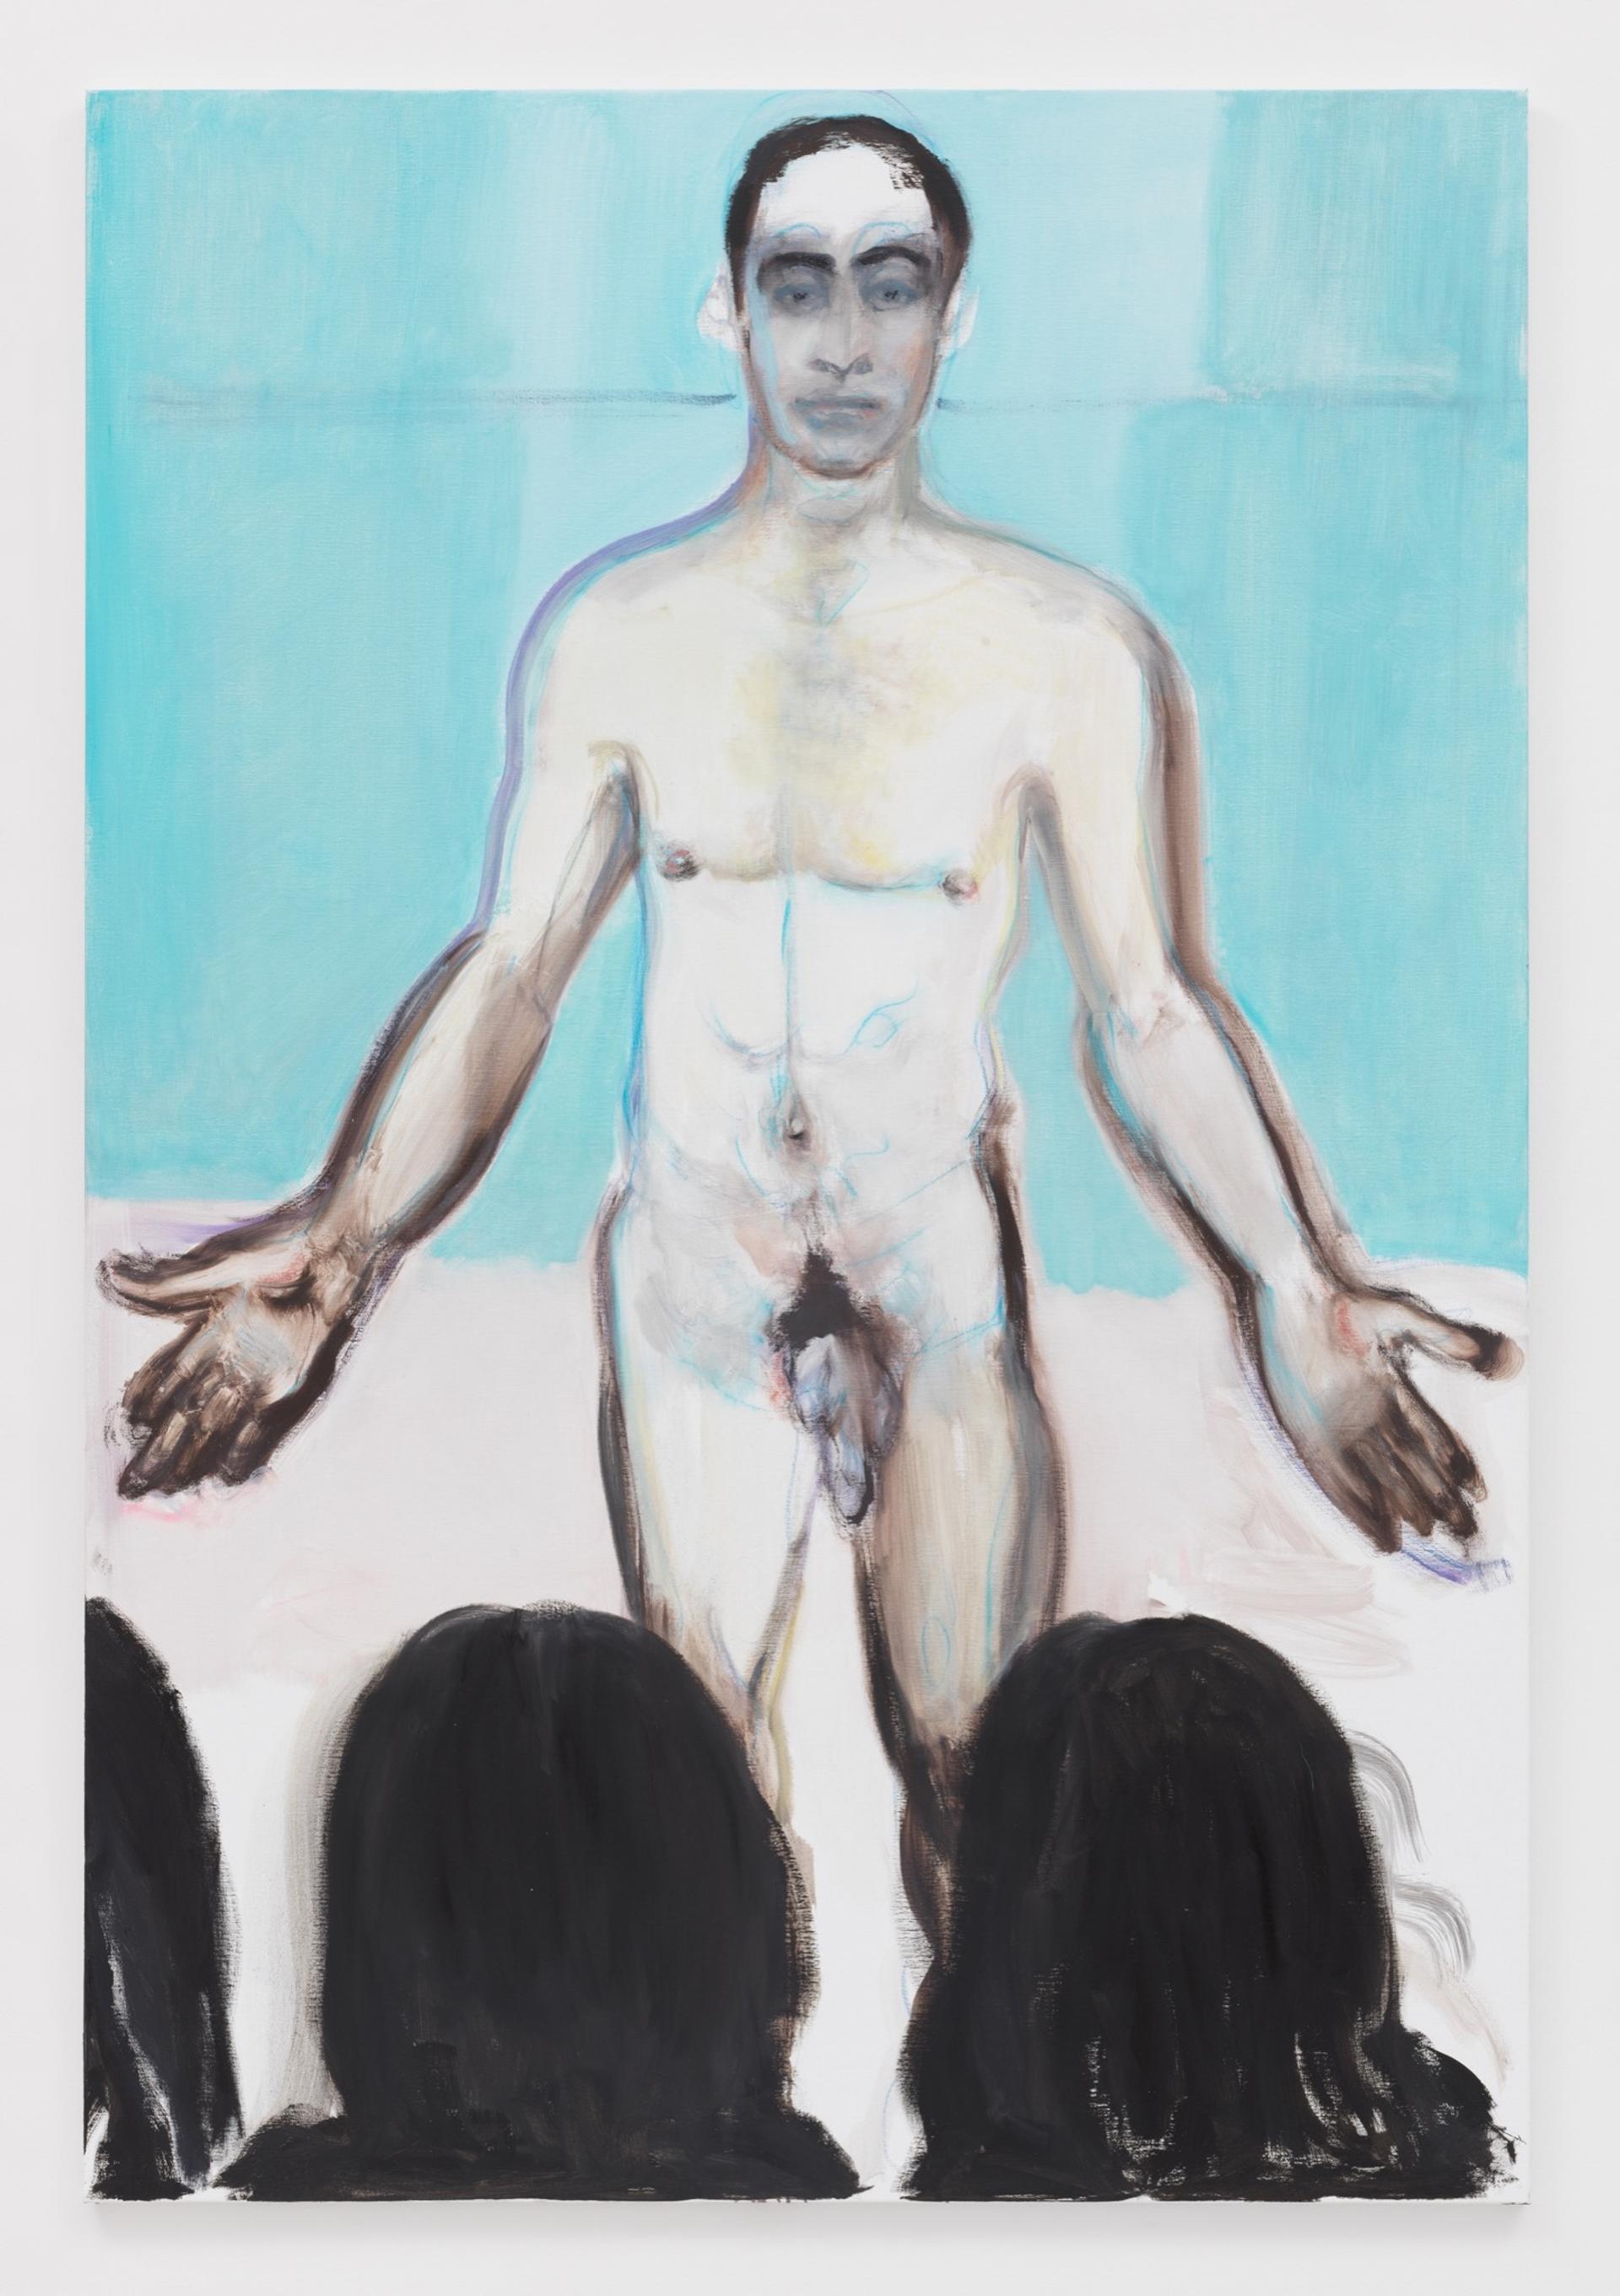 Marlene Dumas 'Amends,' 2018 Oil on canvas Signed, titled, dated, and inscribed verso Image courtesy of David Zwirner